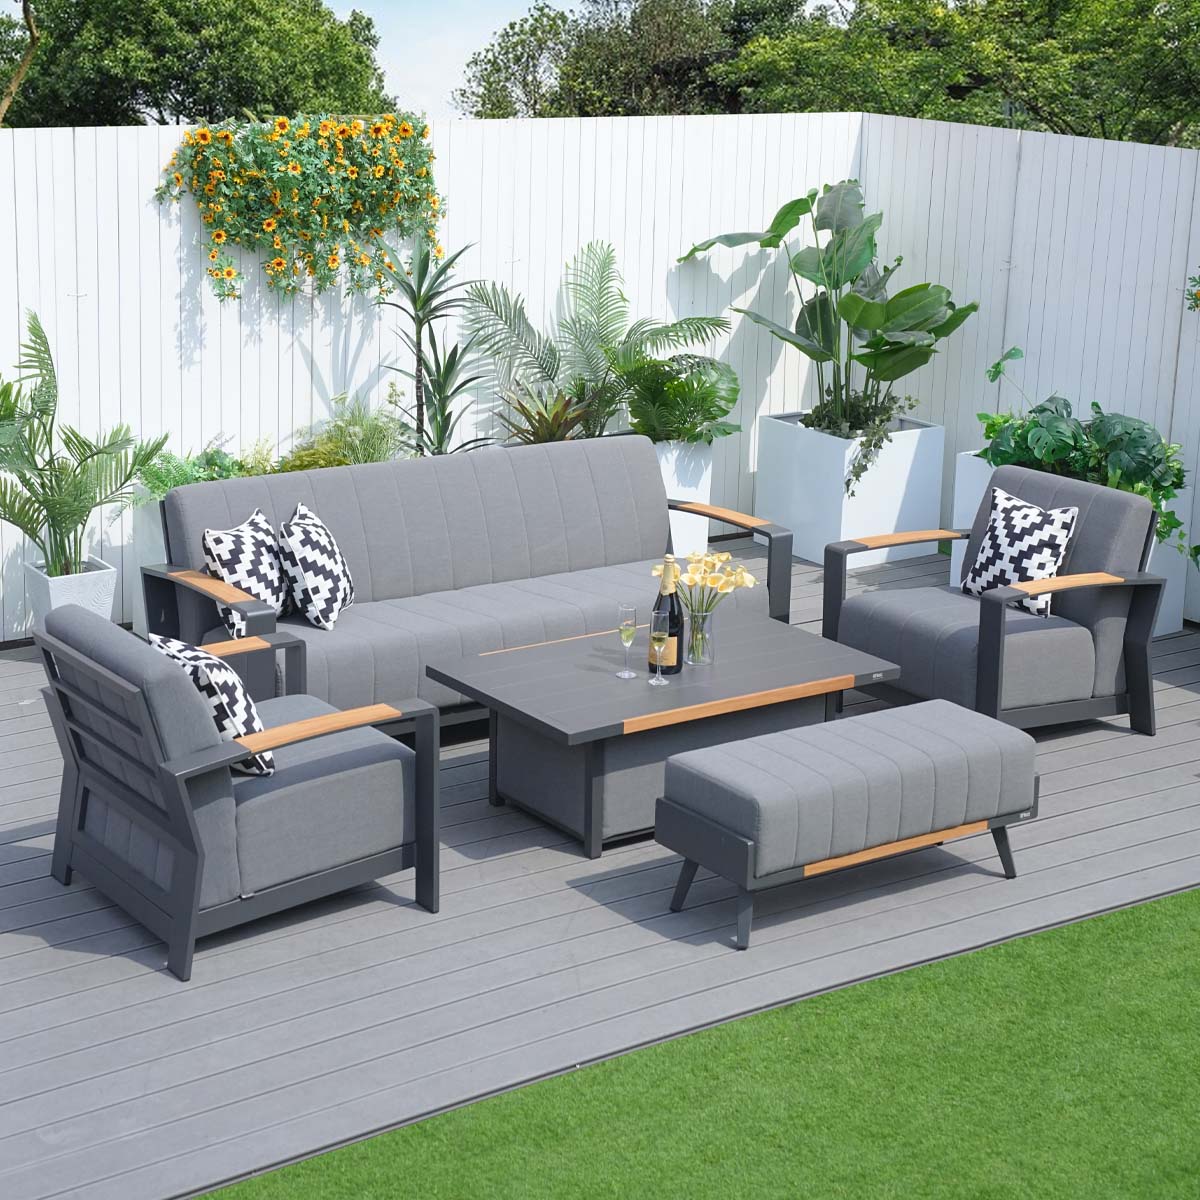 The latest furniture on the market - Abrihome 5-Pieces Patio Garden Aluminum Seating Set with Armchairs